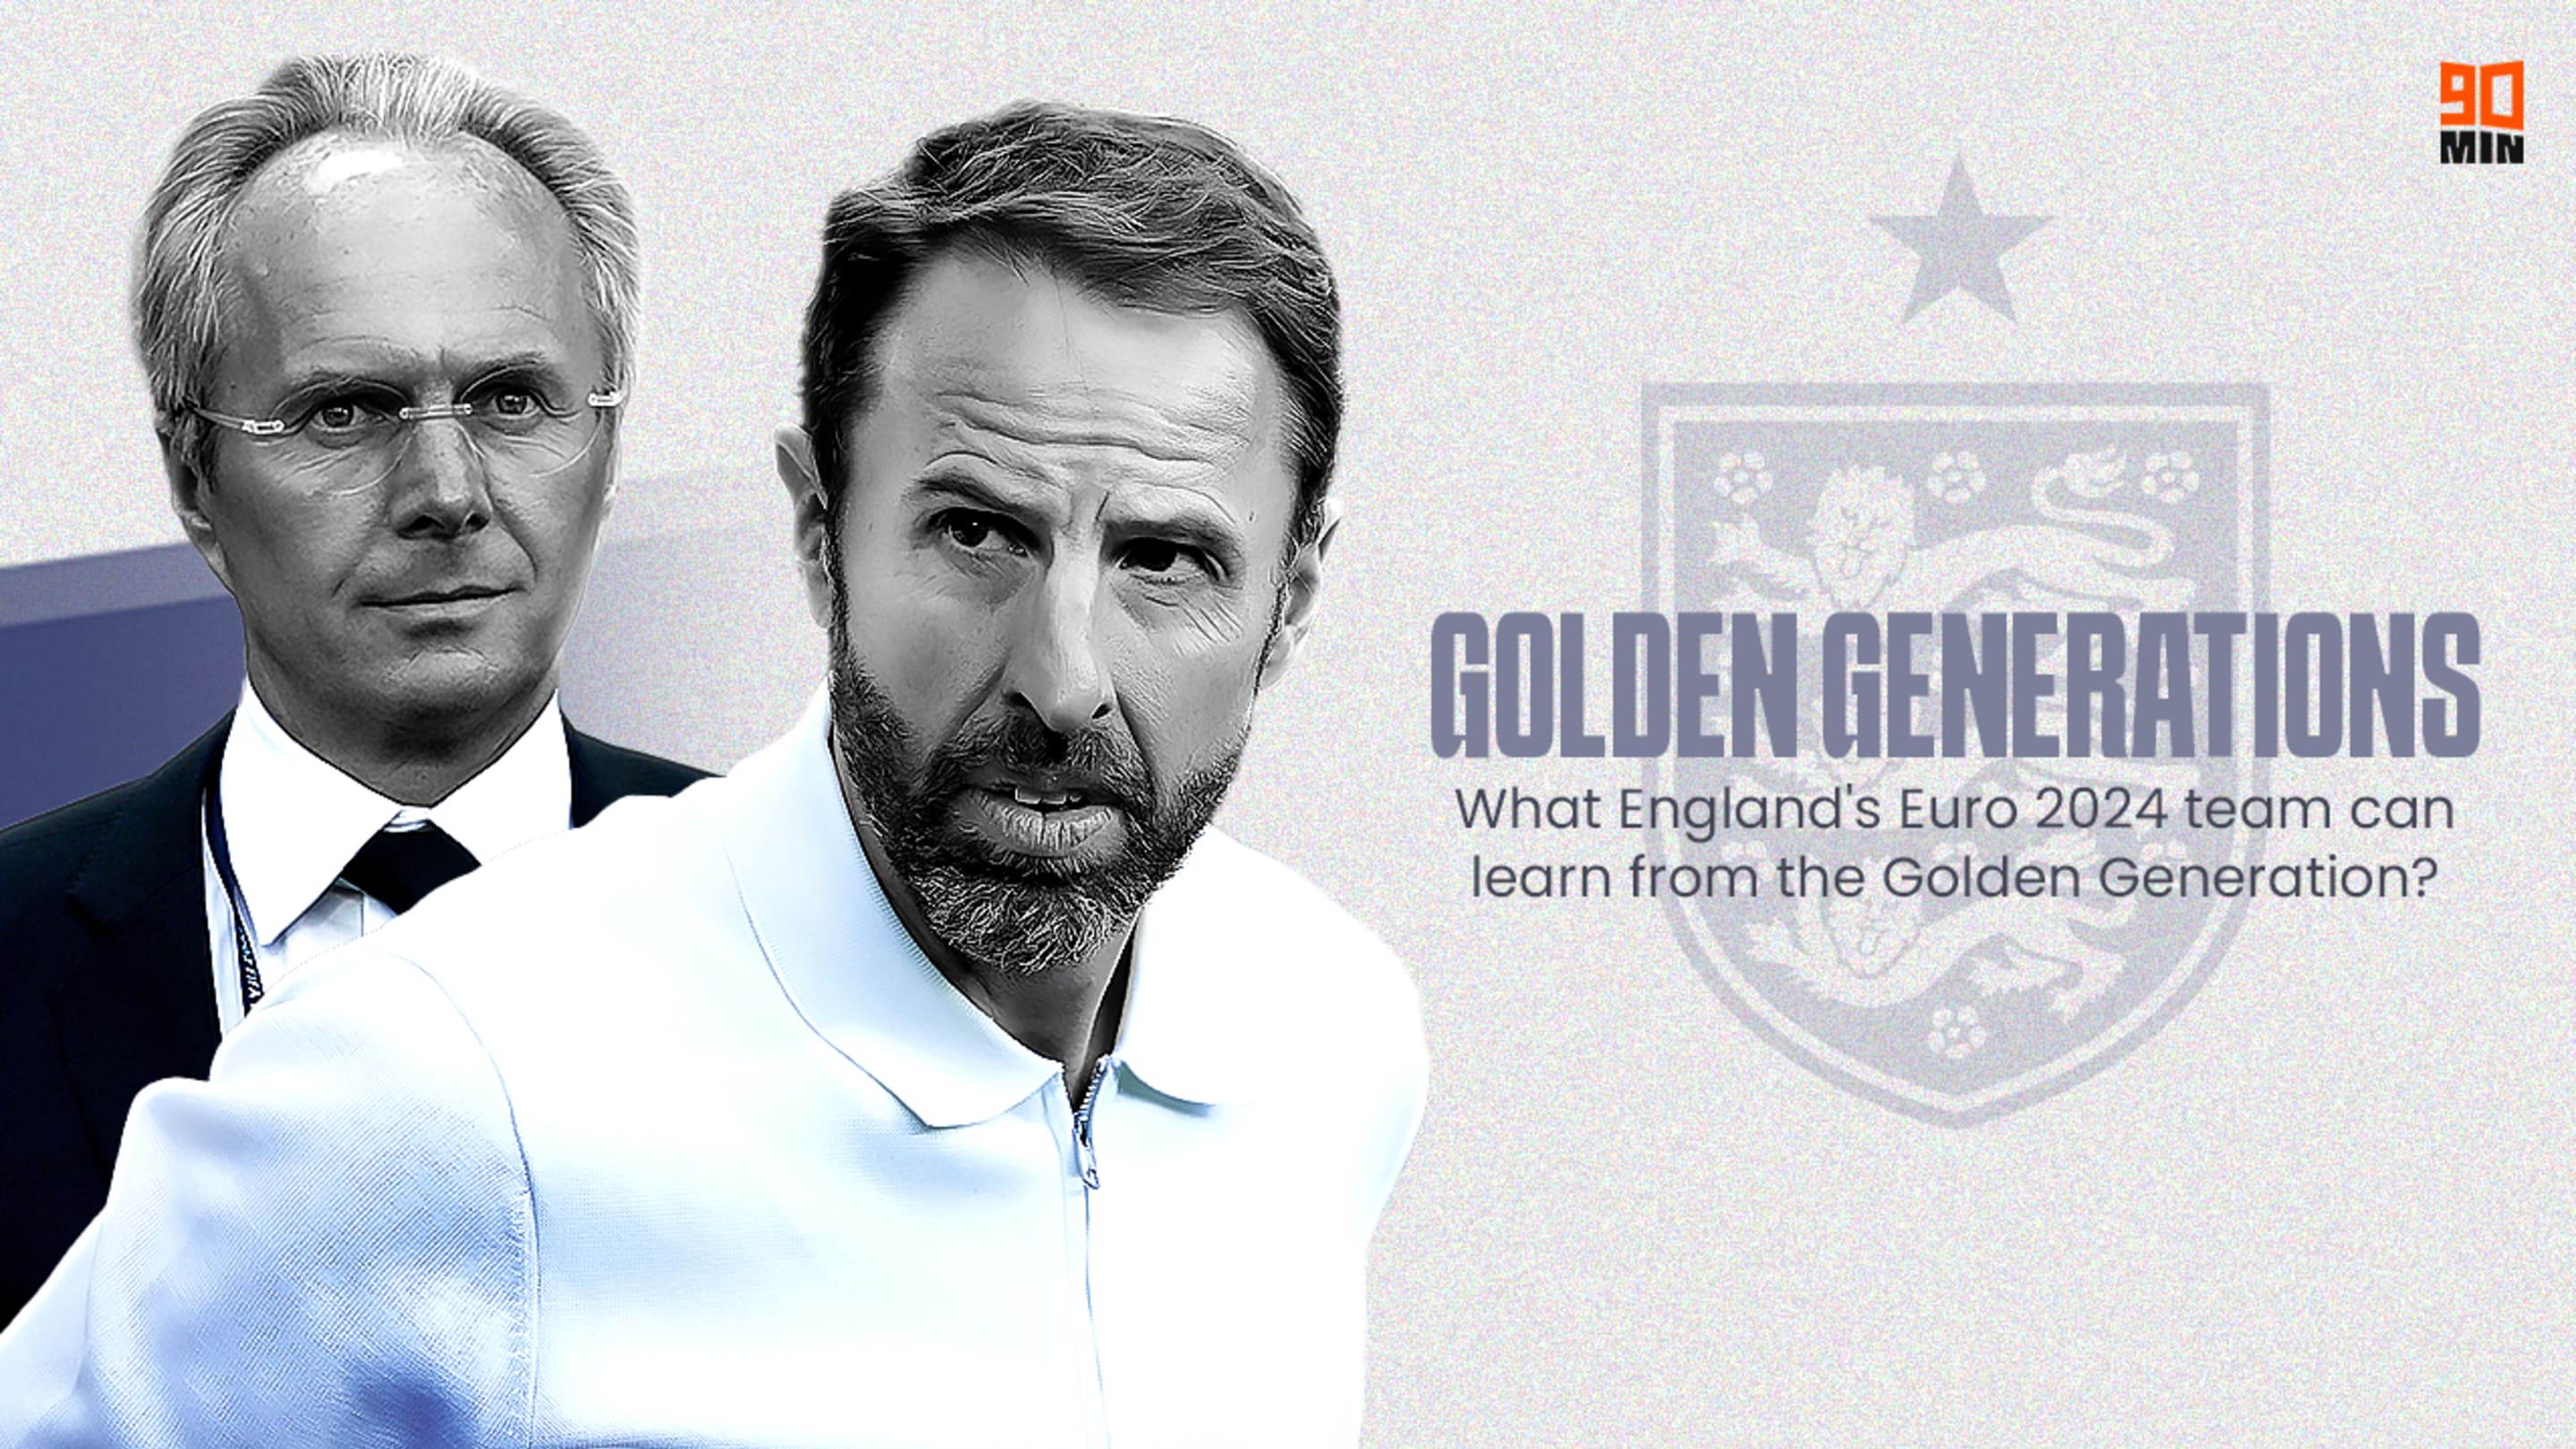 What England's Euro 2024 team can learn from the Golden Generation